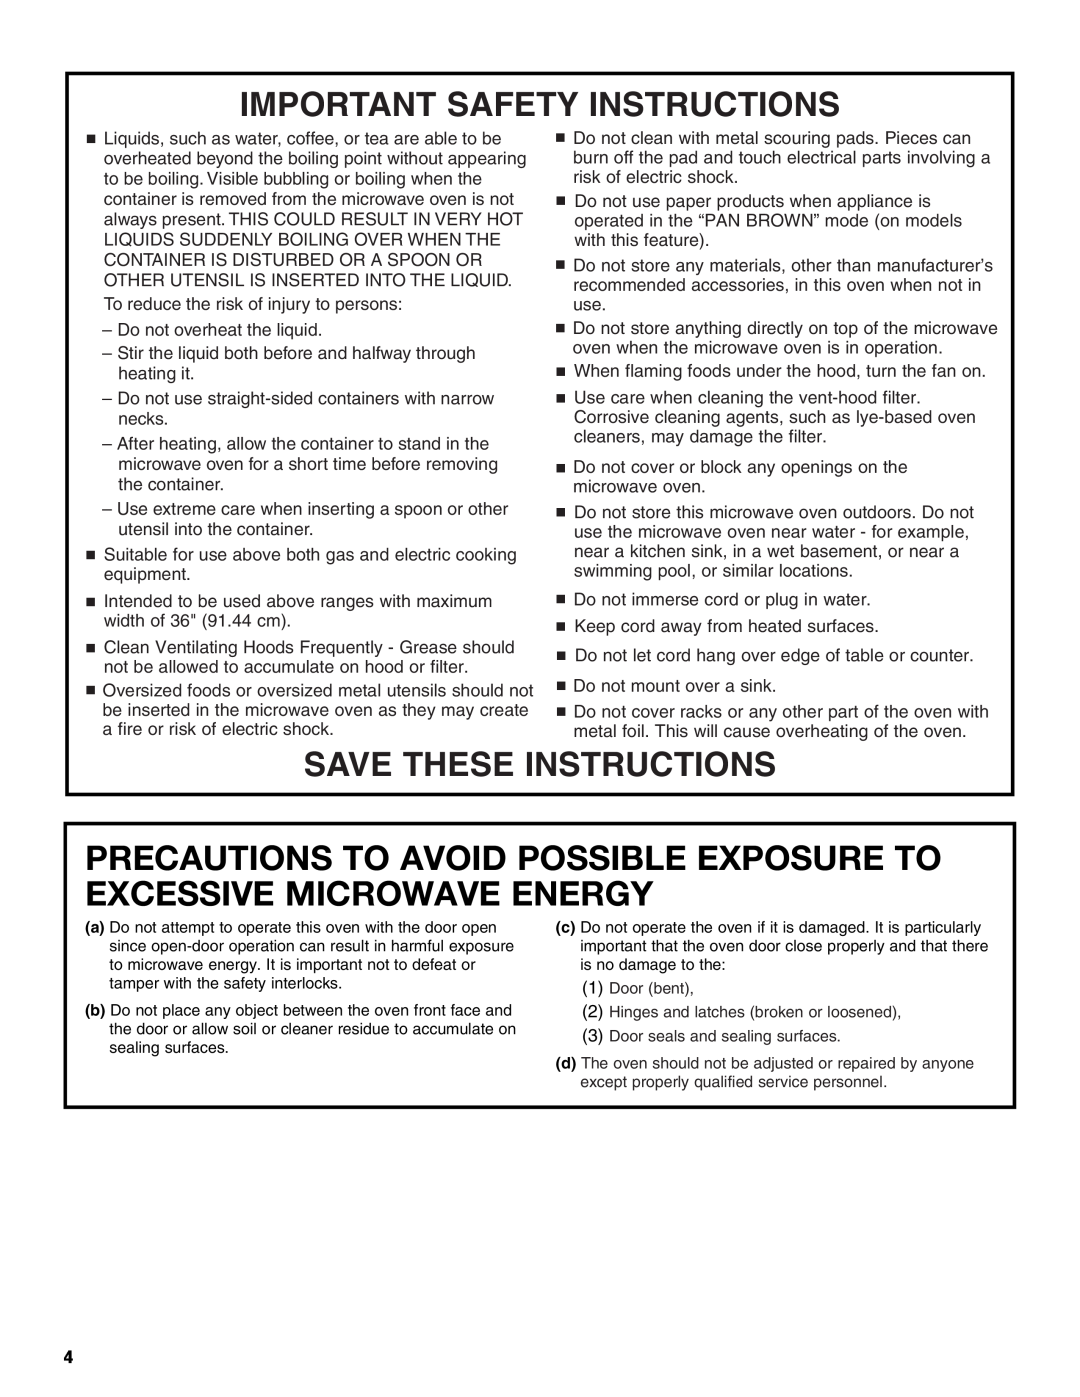 Whirlpool GH6208XR Precautions To Avoid Possible Exposure To Excessive Microwave Energy, Important Safety Instructions 